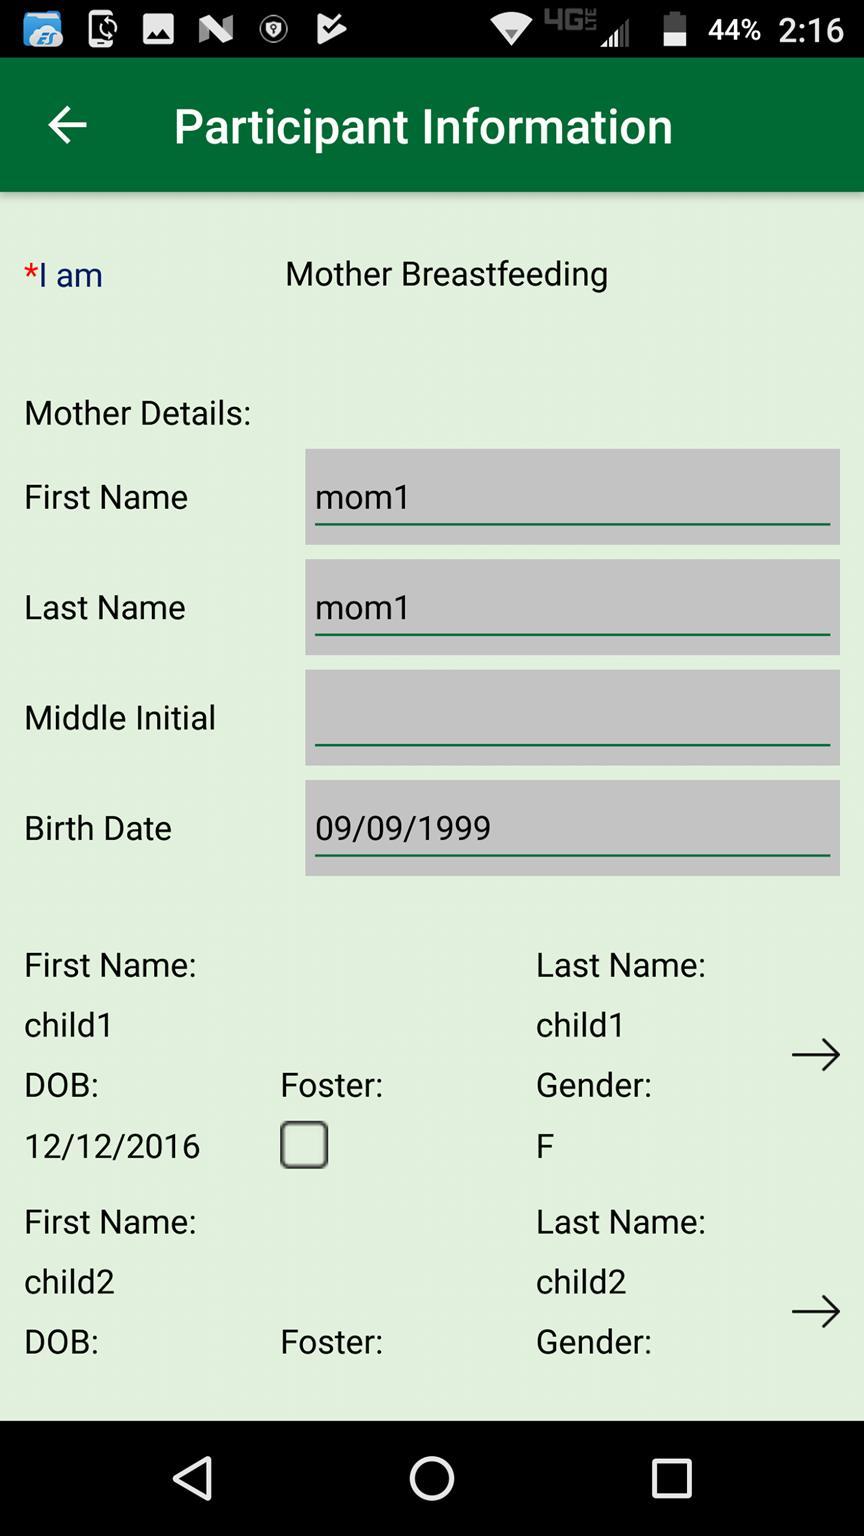 Family Information: Participant